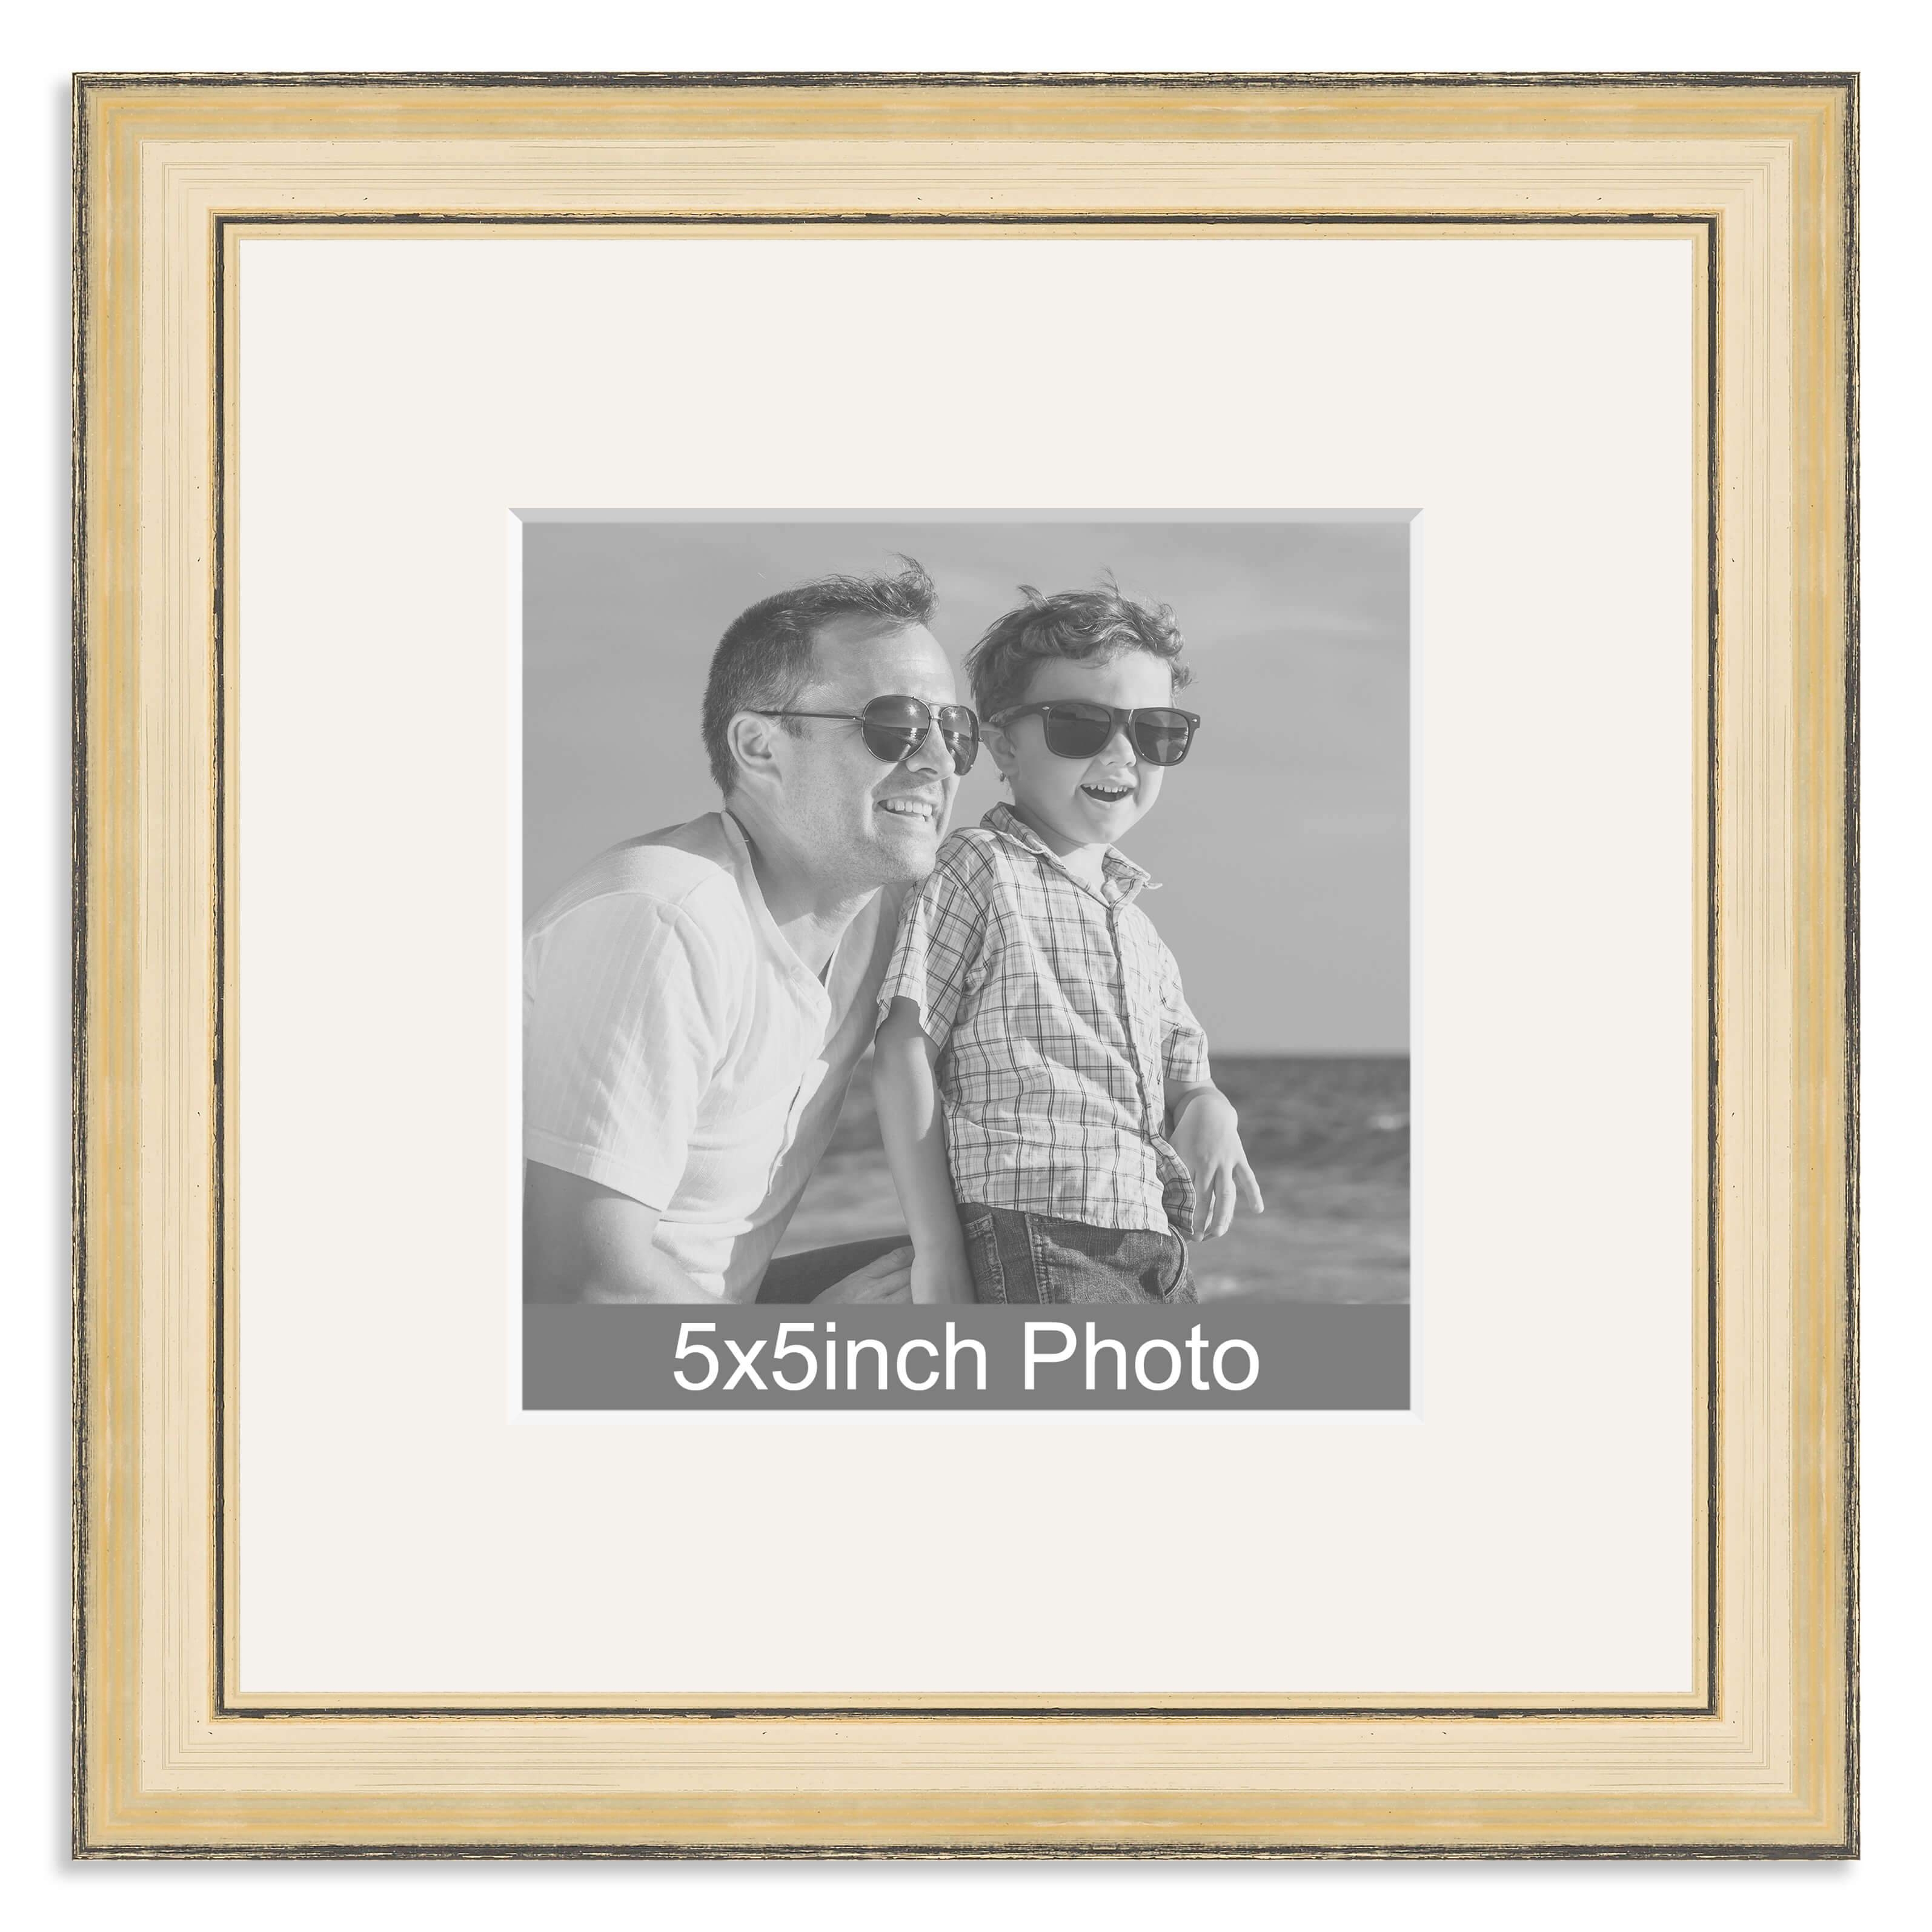 Gold Wooden Photo Frame with mount for a 5x5in Photo